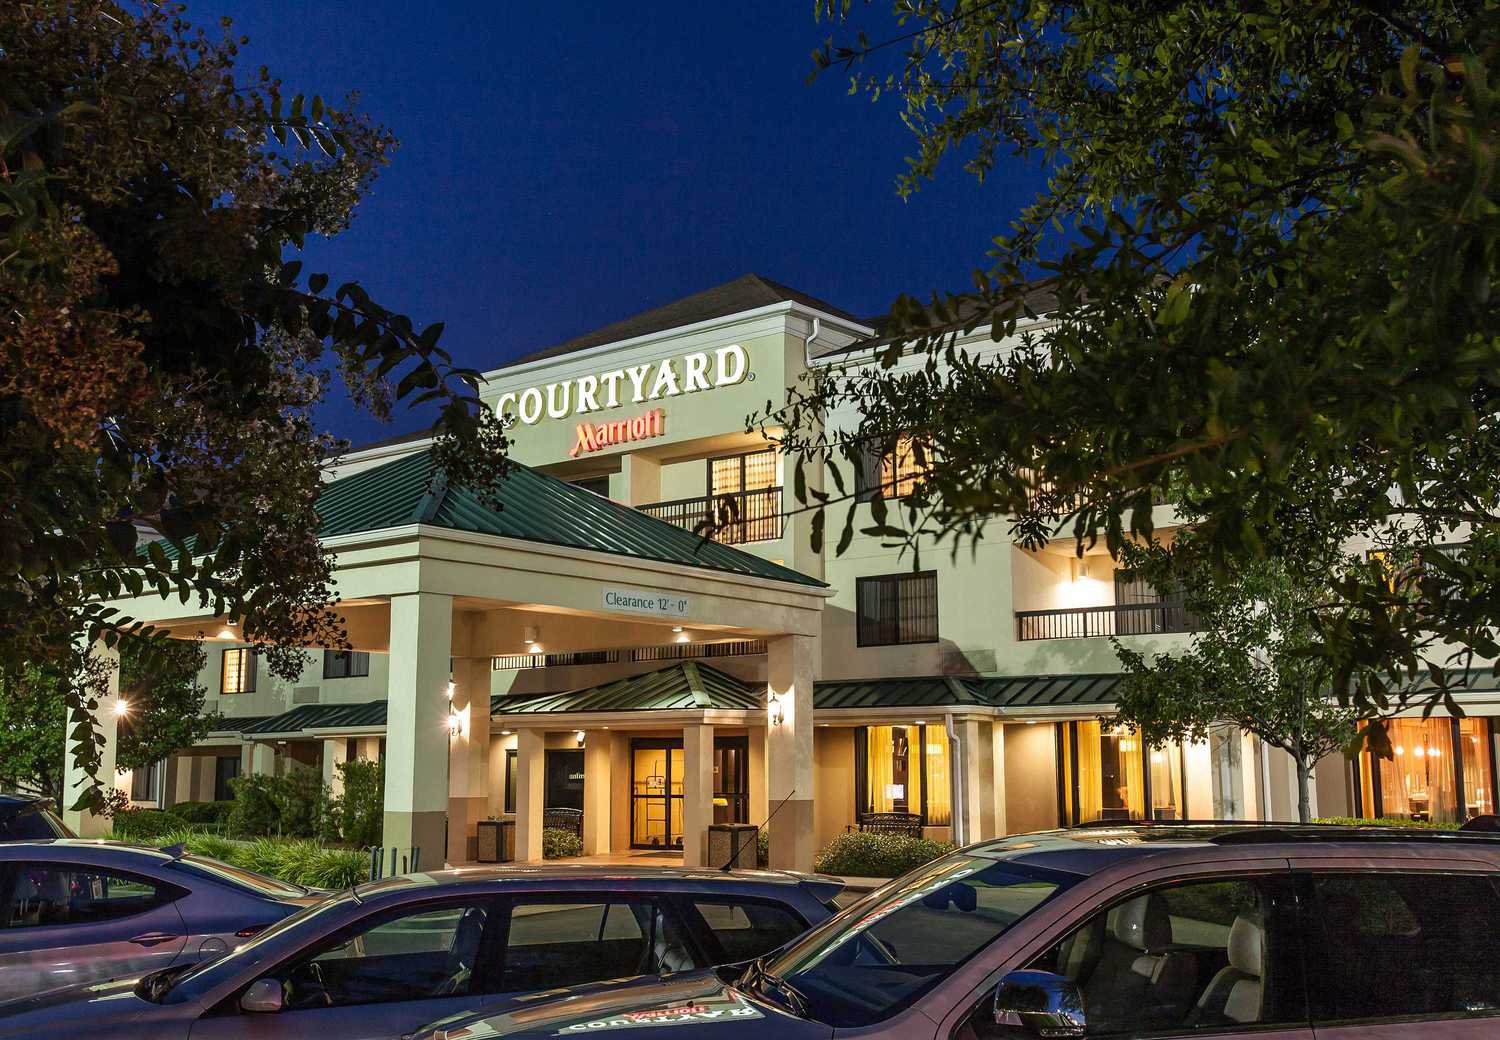 Courtyard Florence, Florence, SC Jobs | Hospitality Online